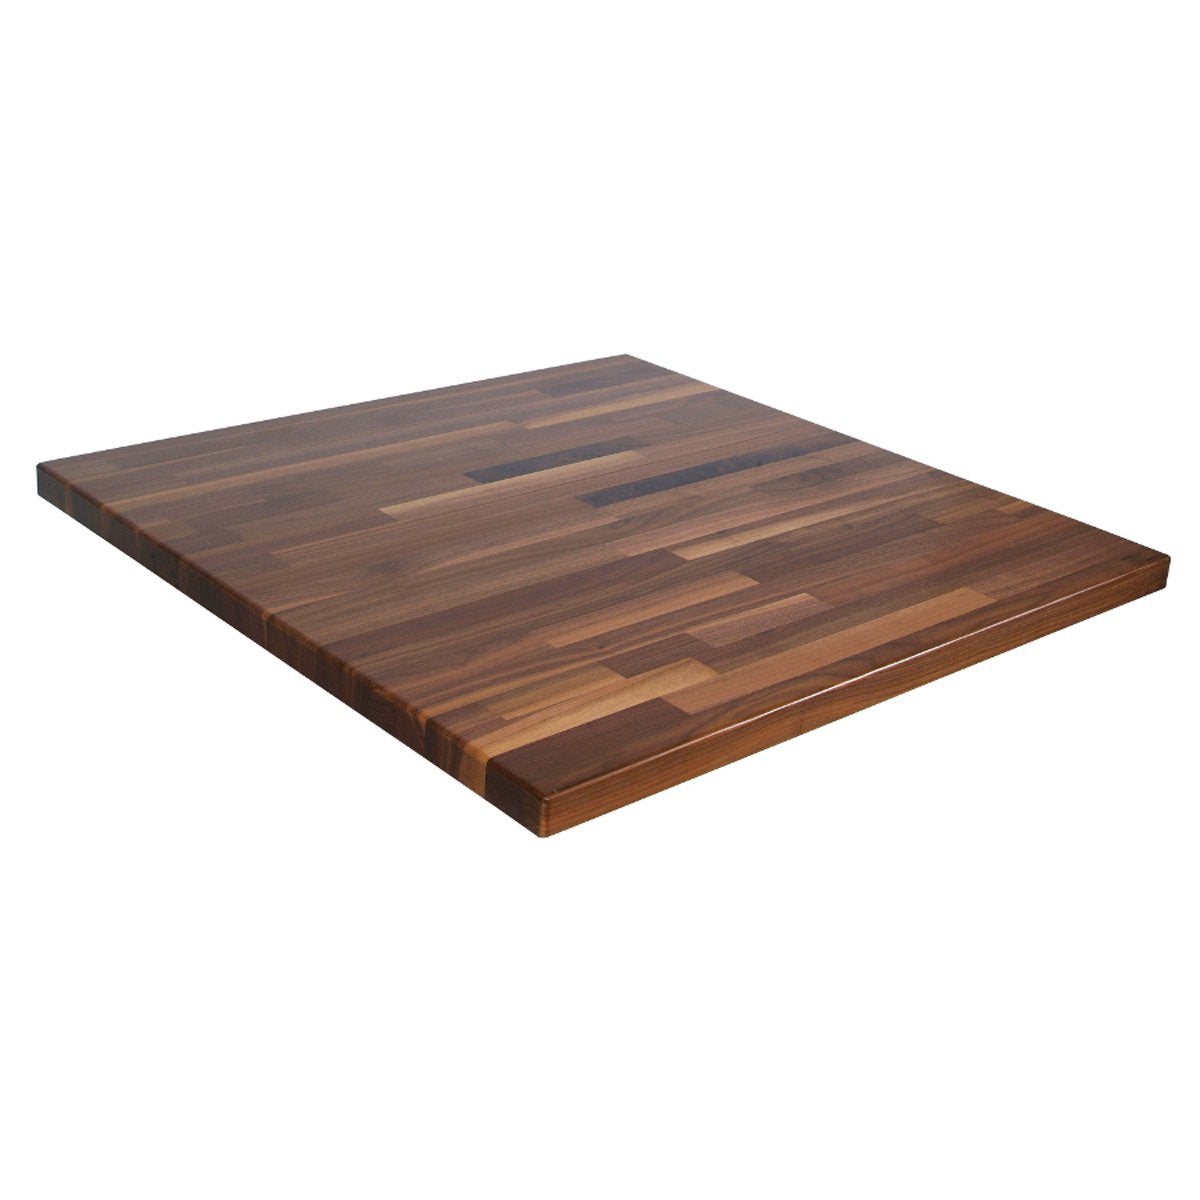 John Boos WALKCT-BL10925-O Blended Walnut 25 Wide Kitchen Counter Top, 1-1/2 Thick, 109 x 25, Oil Finish